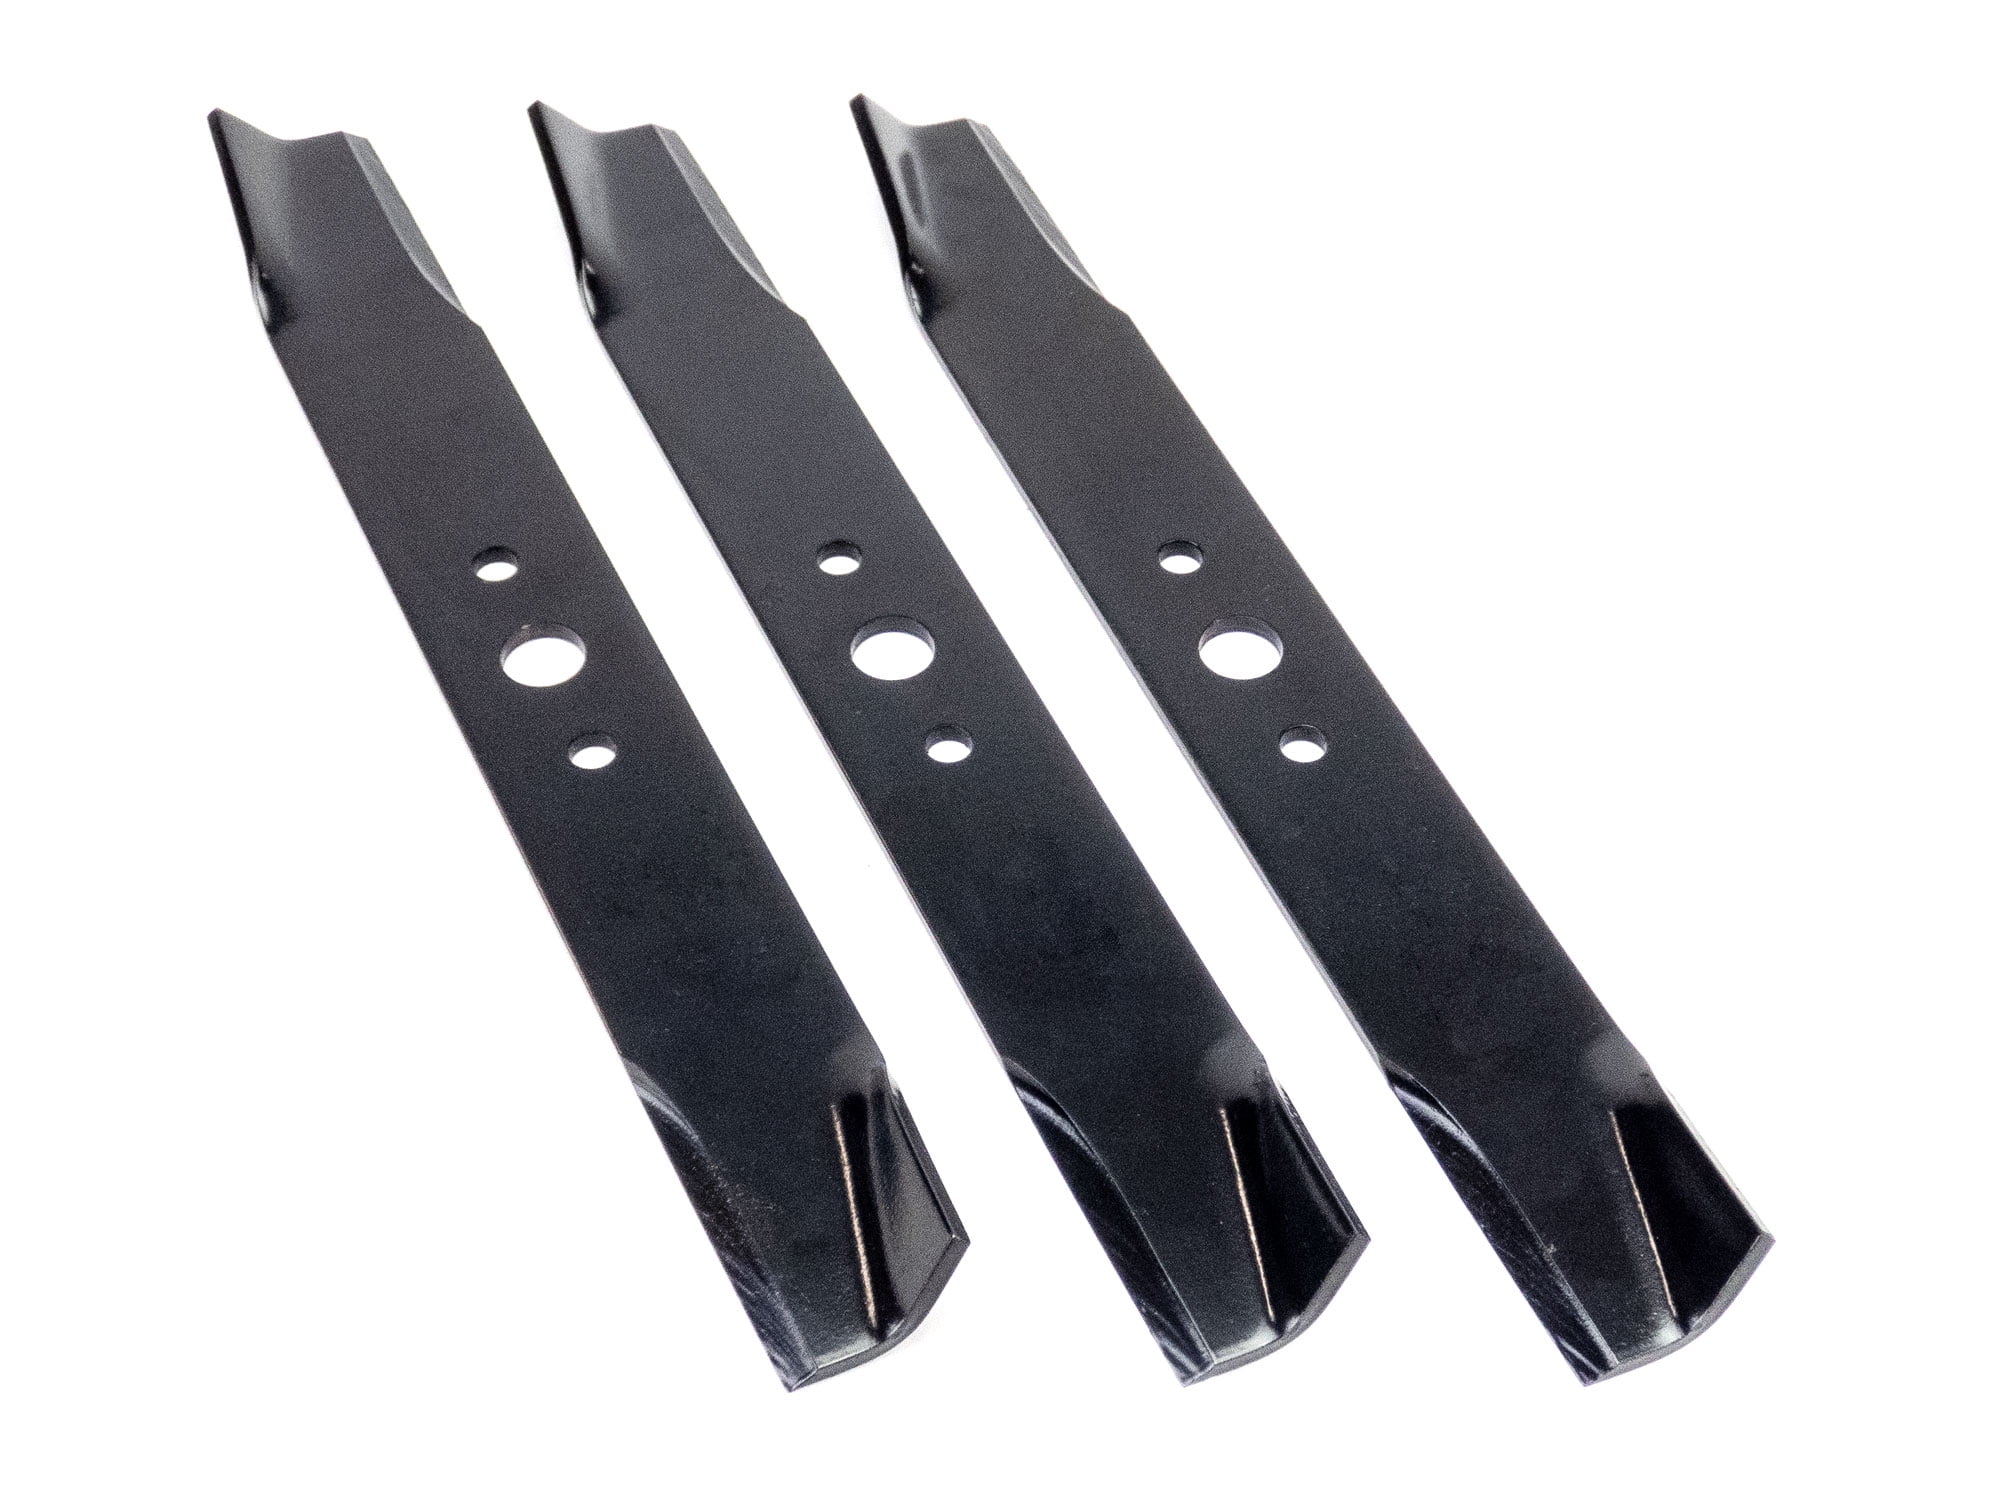 6 Reaper 54" Hi Lift Blades for Husqvarna Replaces 187254 187256 Made in USA 